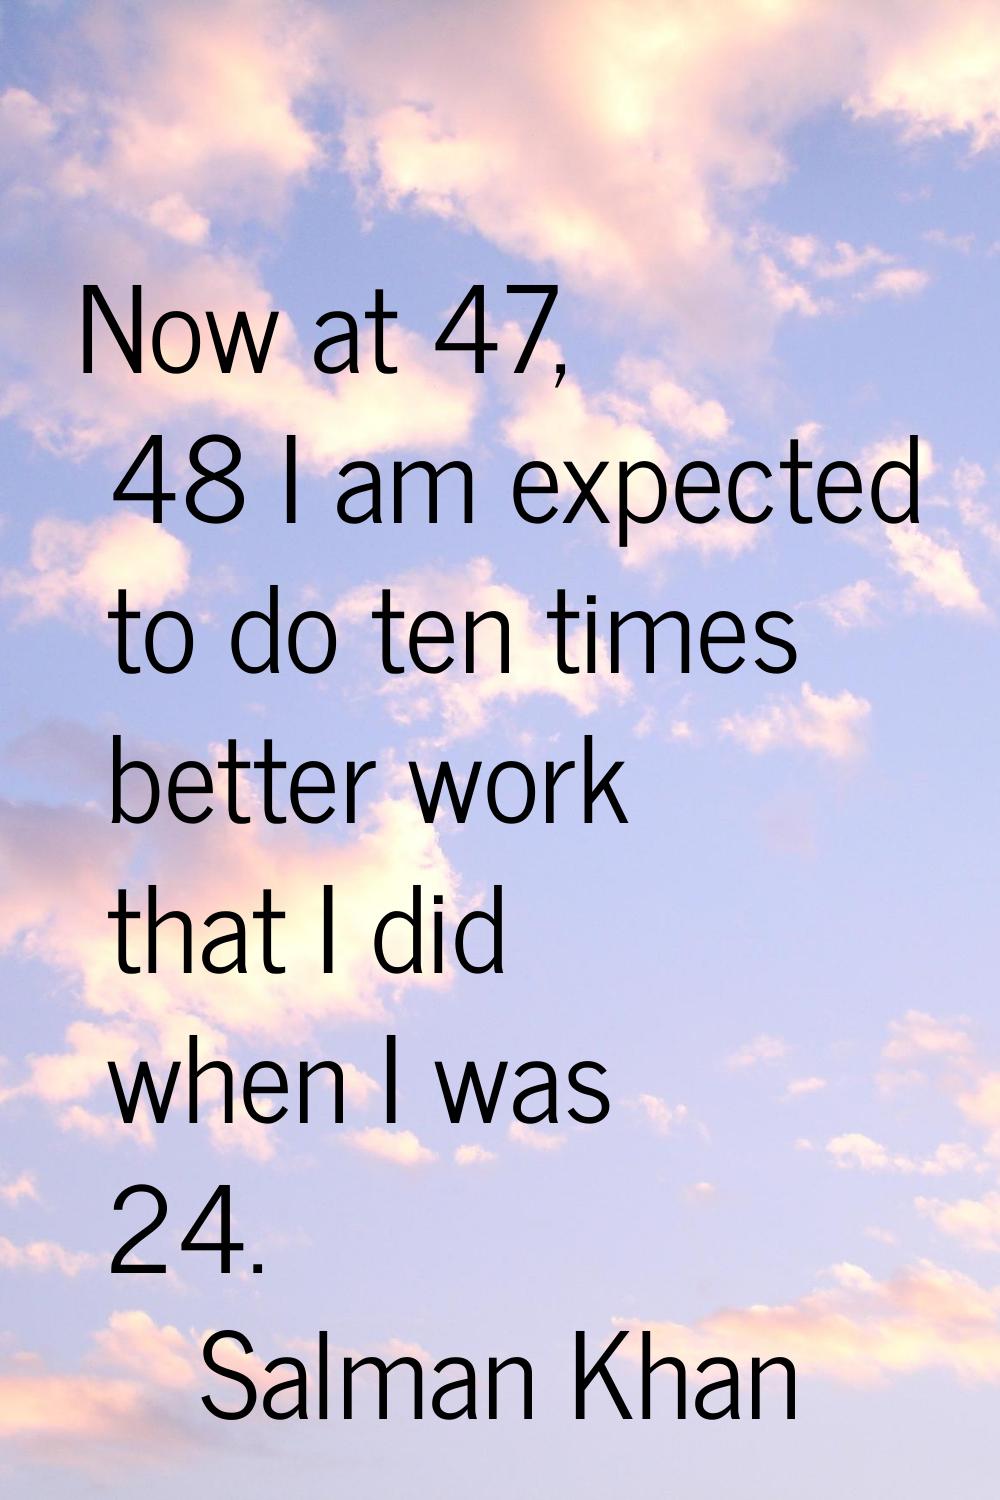 Now at 47, 48 I am expected to do ten times better work that I did when I was 24.